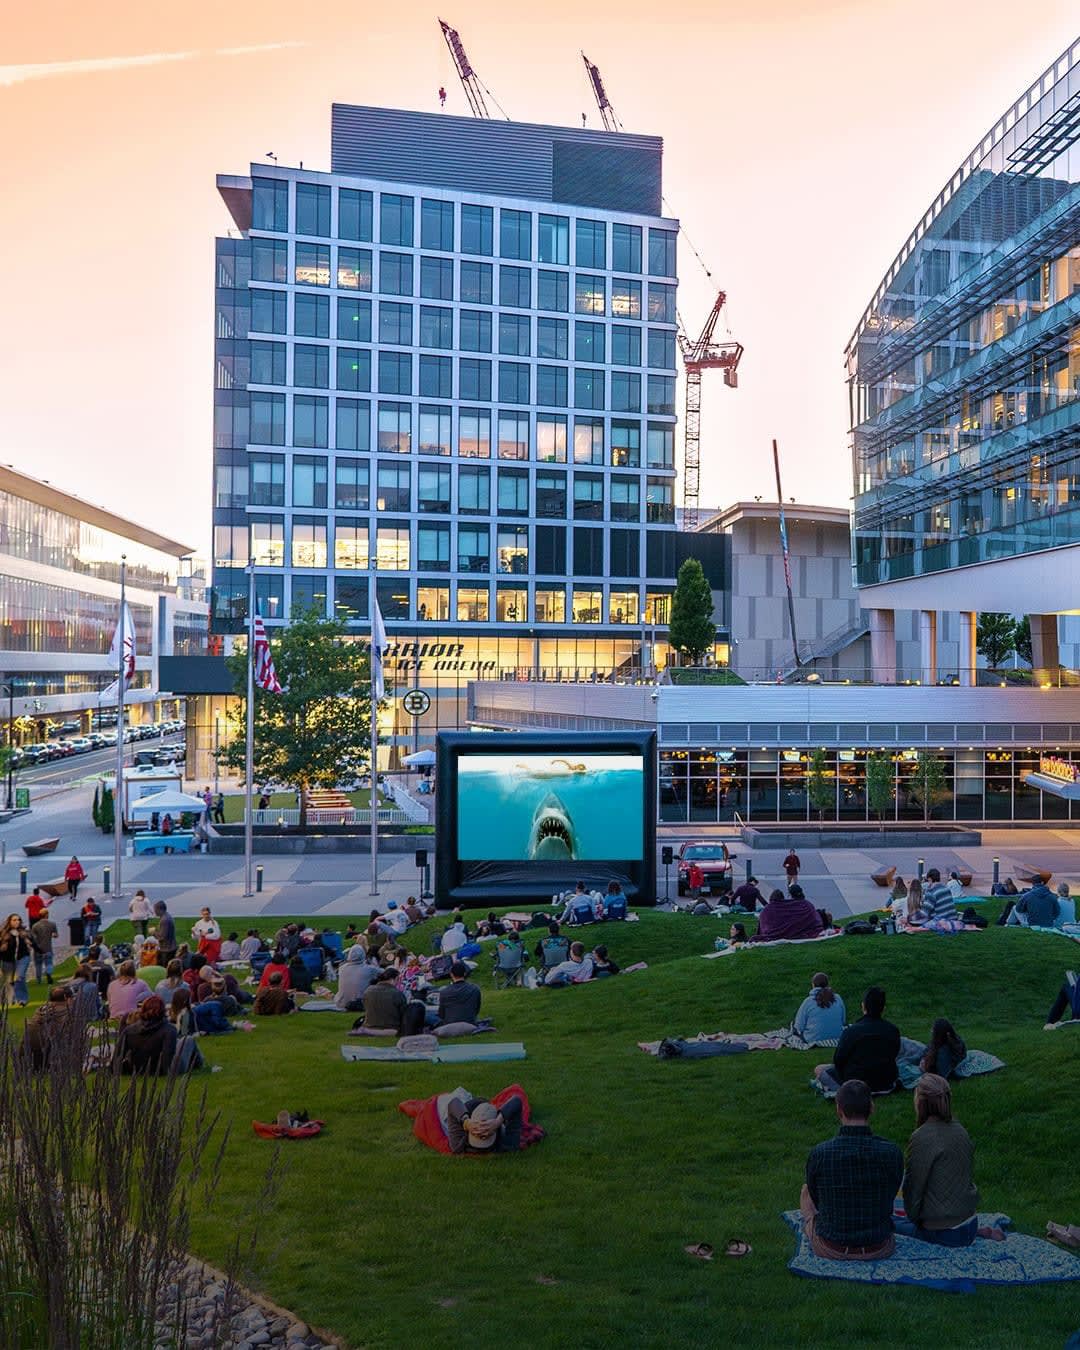 FREE outdoor movies in Boston 🍿🎥